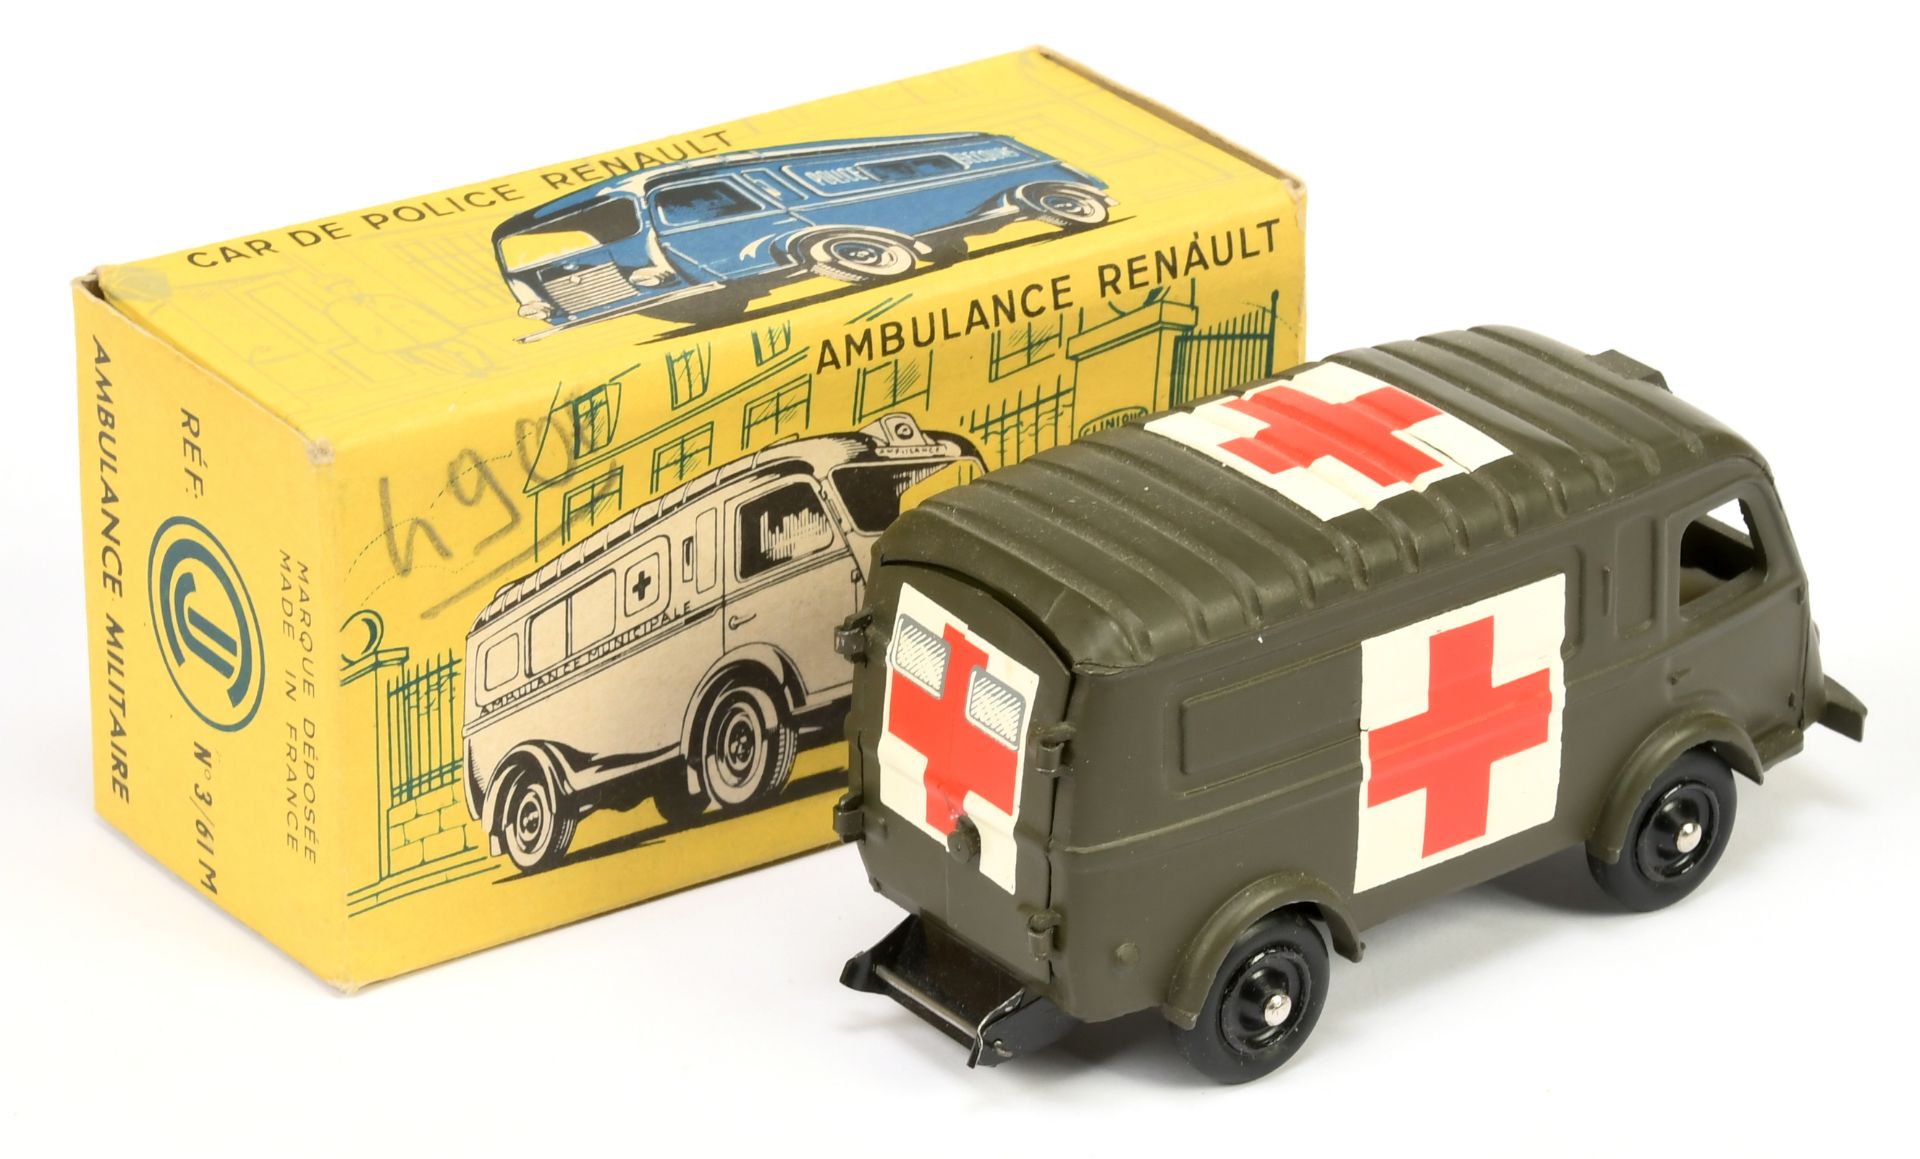 CIJ 3/61 Renault "Ambulance" - drab green, with red and white cross on roof - Bild 2 aus 2